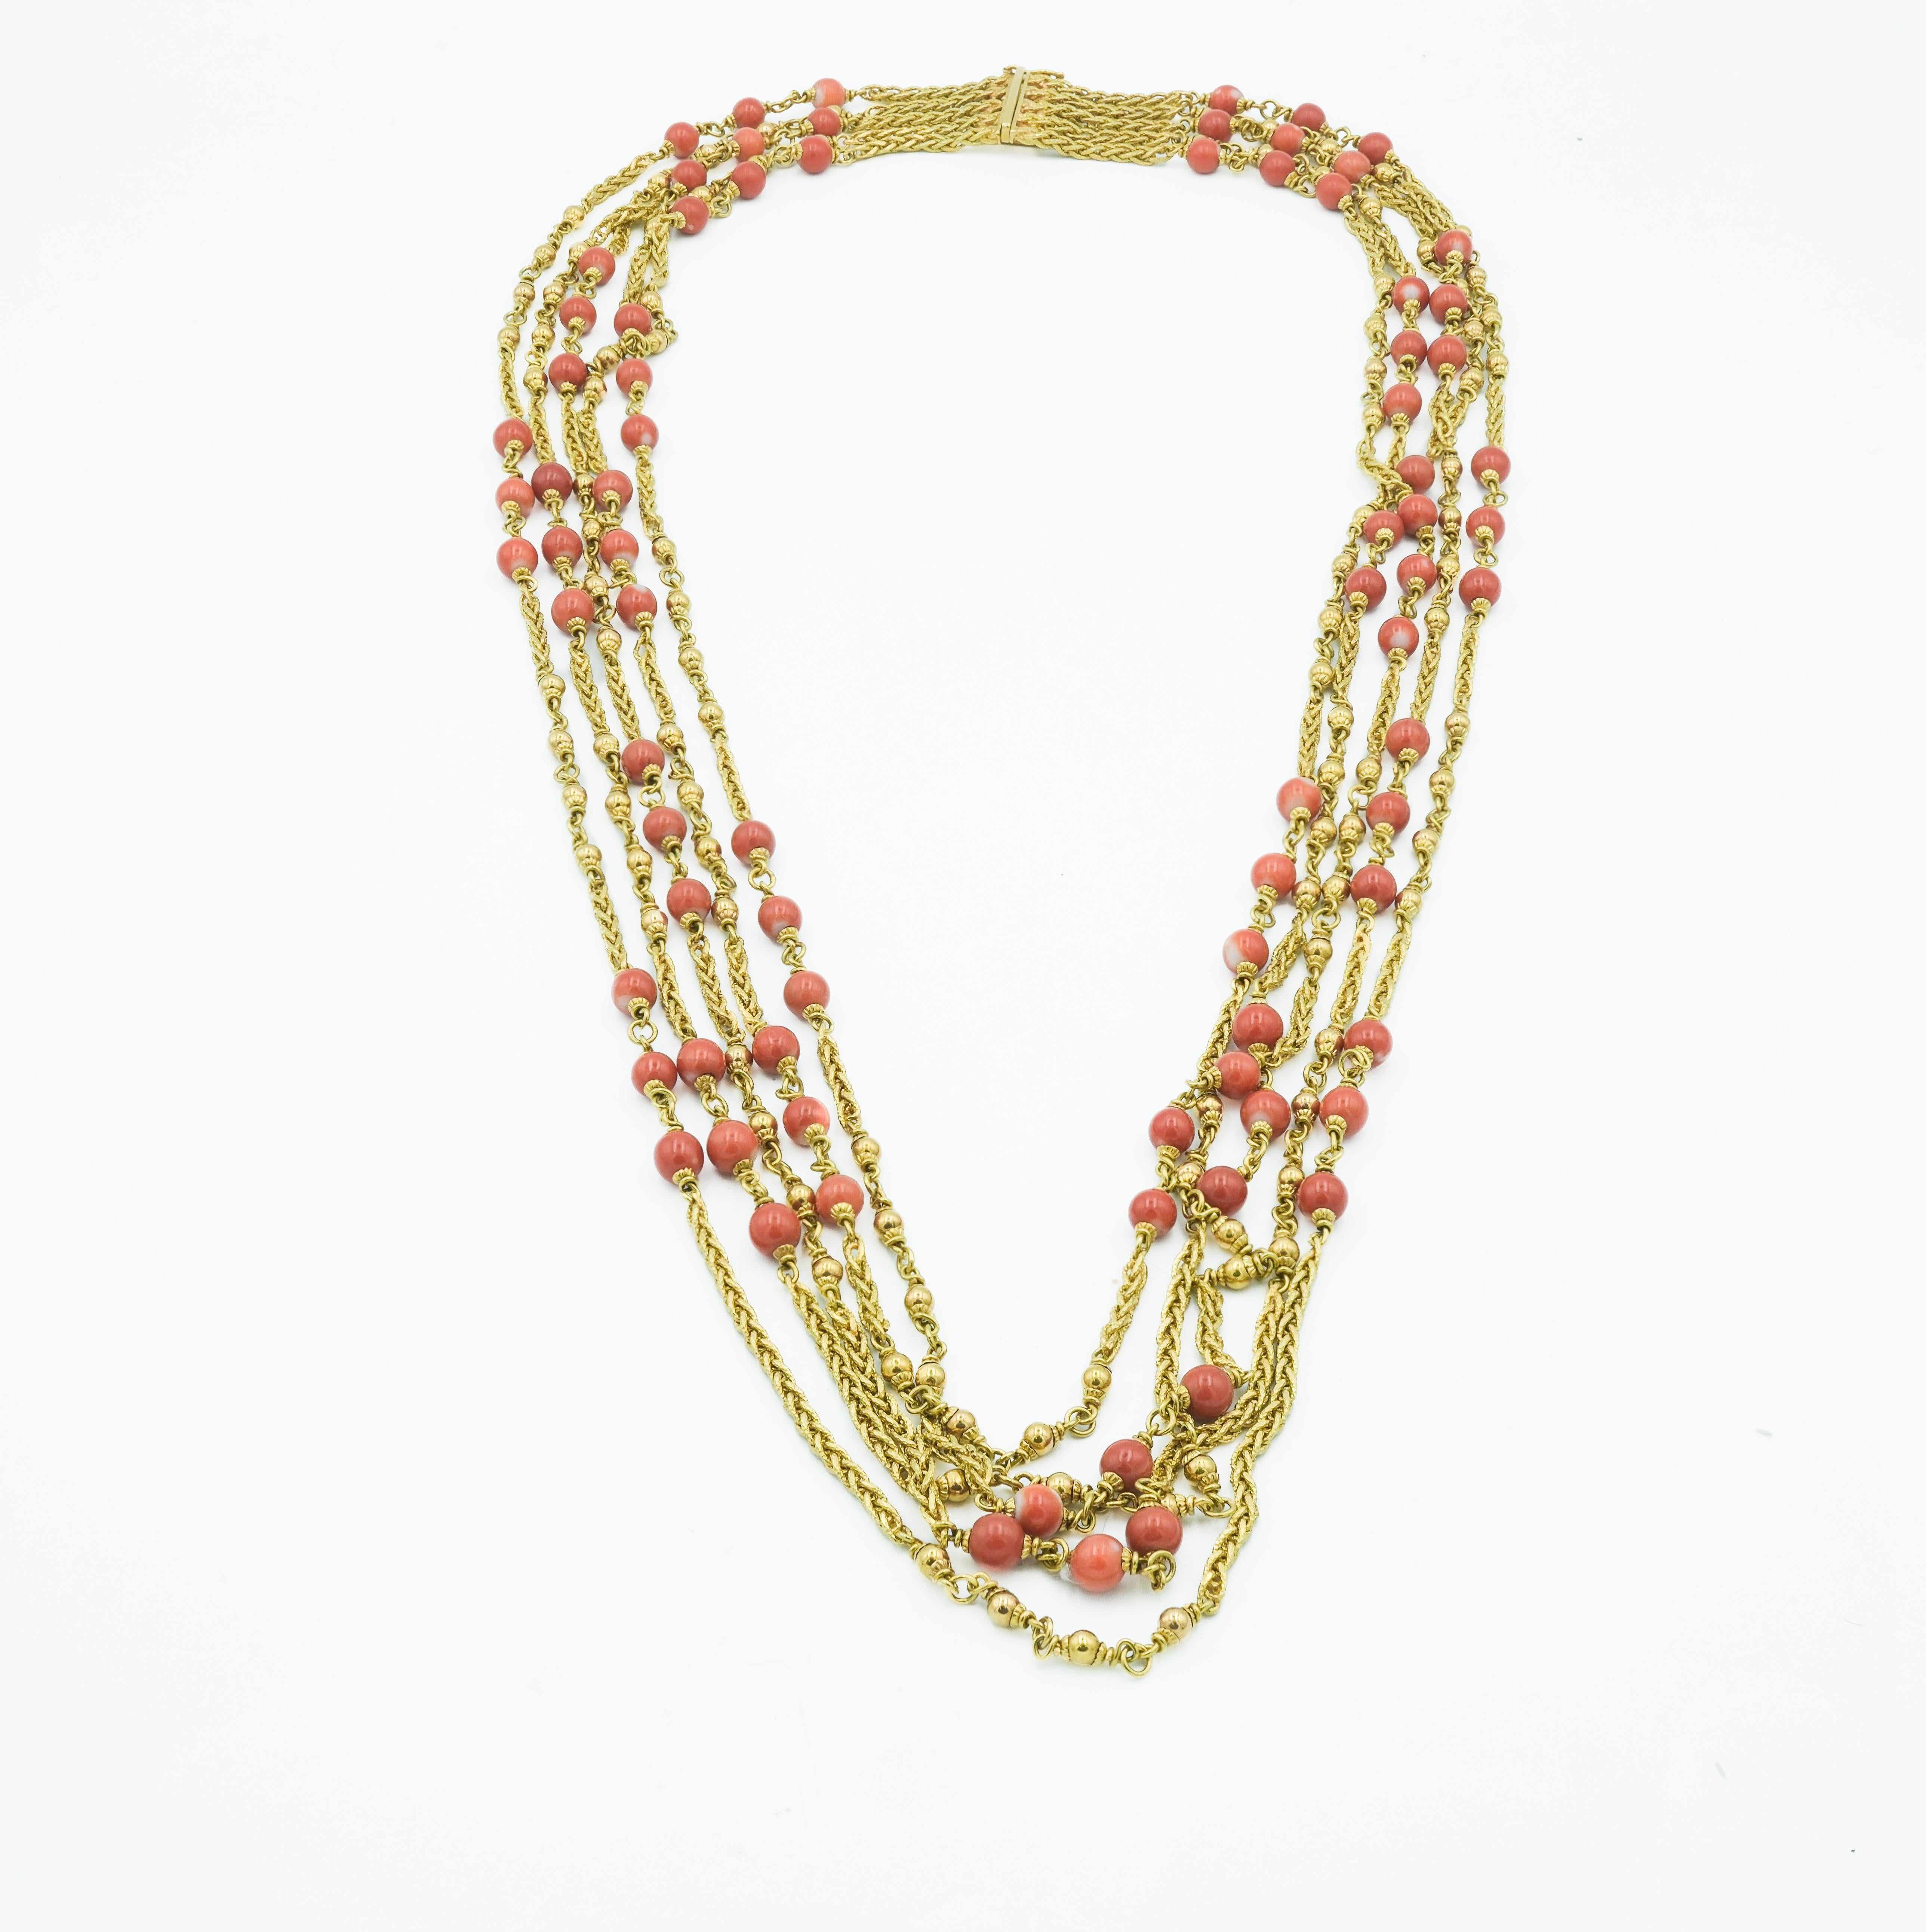 This multi-string layered necklace is a handcrafted piece, composed of 18 karat yellow gold and decorated with coral beads. The design features multiple chains interlinked and cascading in a tiered fashion, creating a textured and statement look.